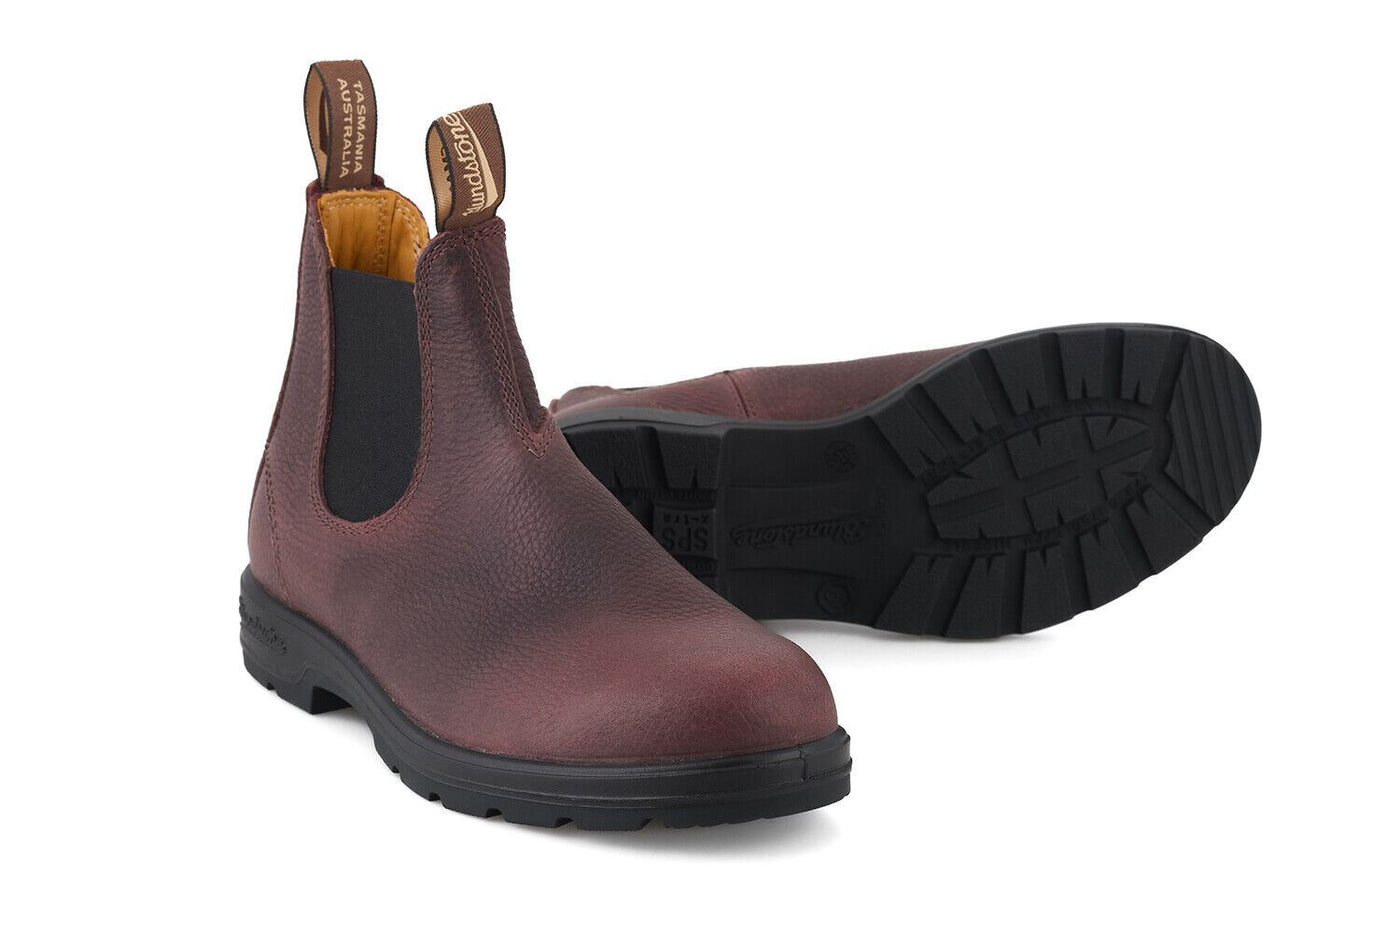 Blundstone #2247 Mesquite Brown Leather Chelsea Boot